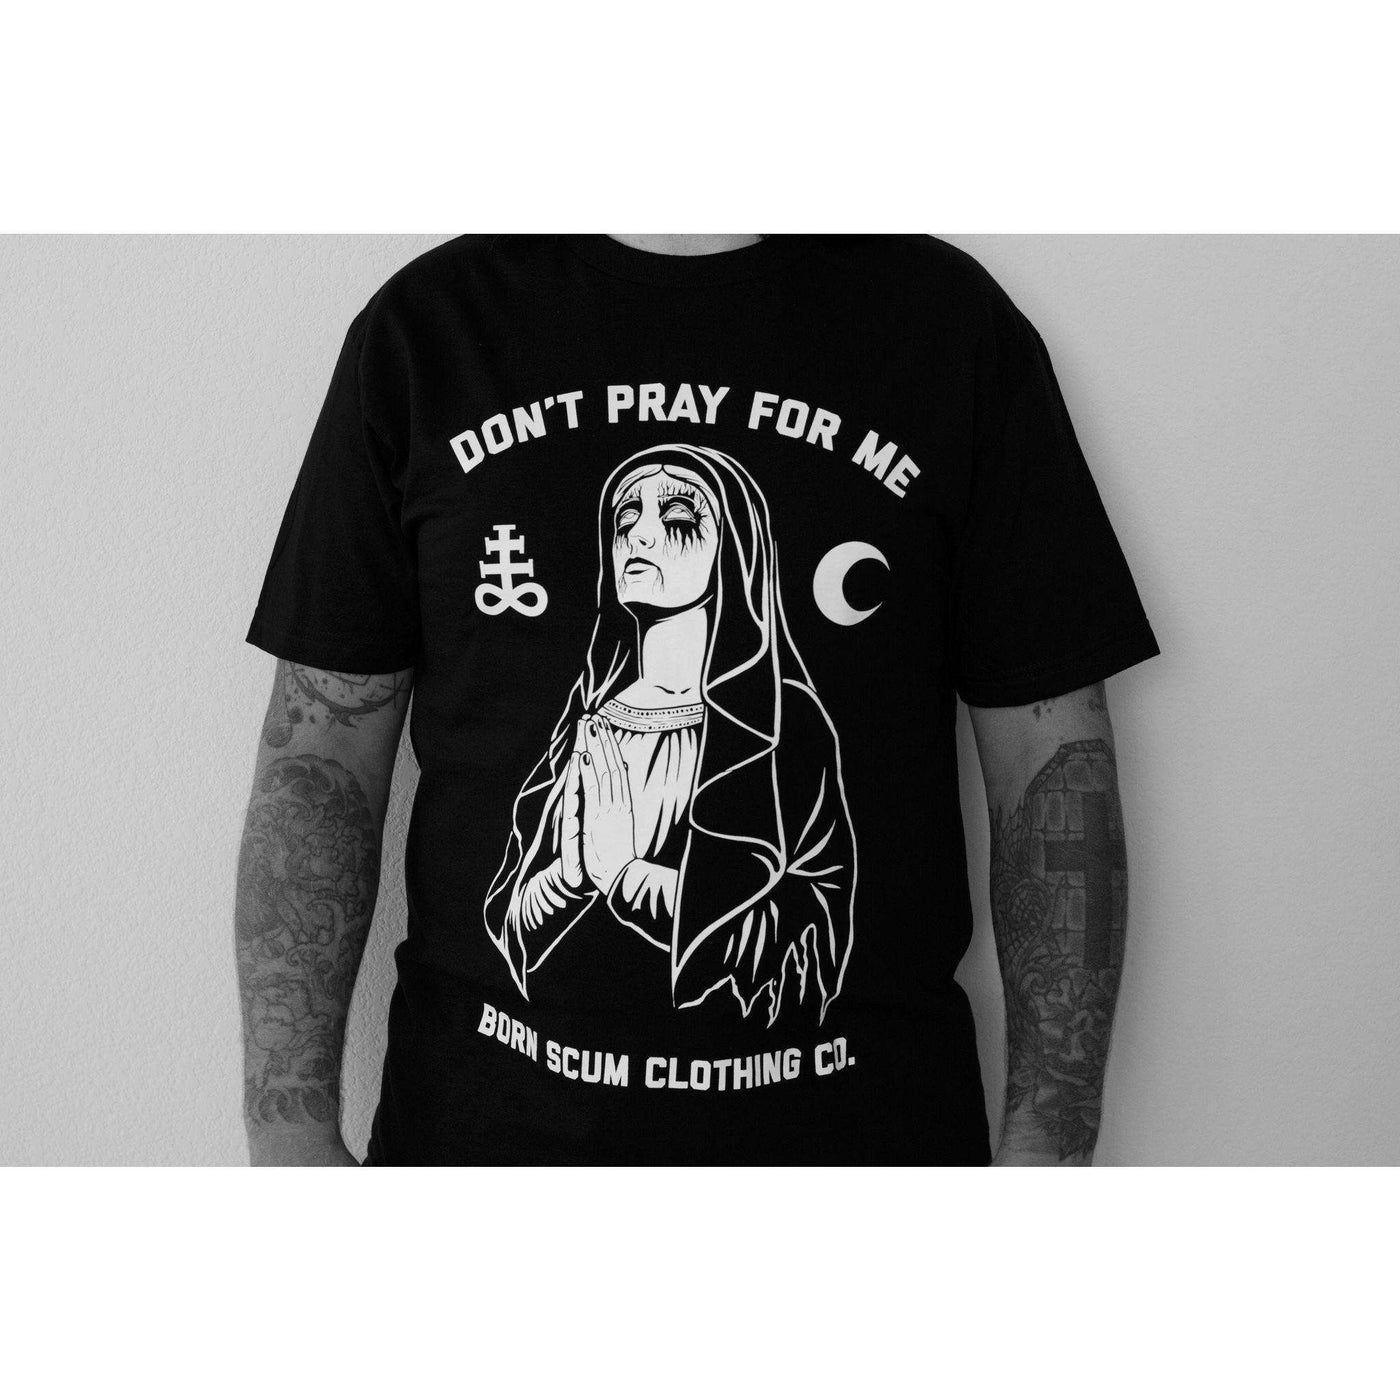 DON'T PRAY FOR ME T-SHIRT - Born Scum Clothing Co